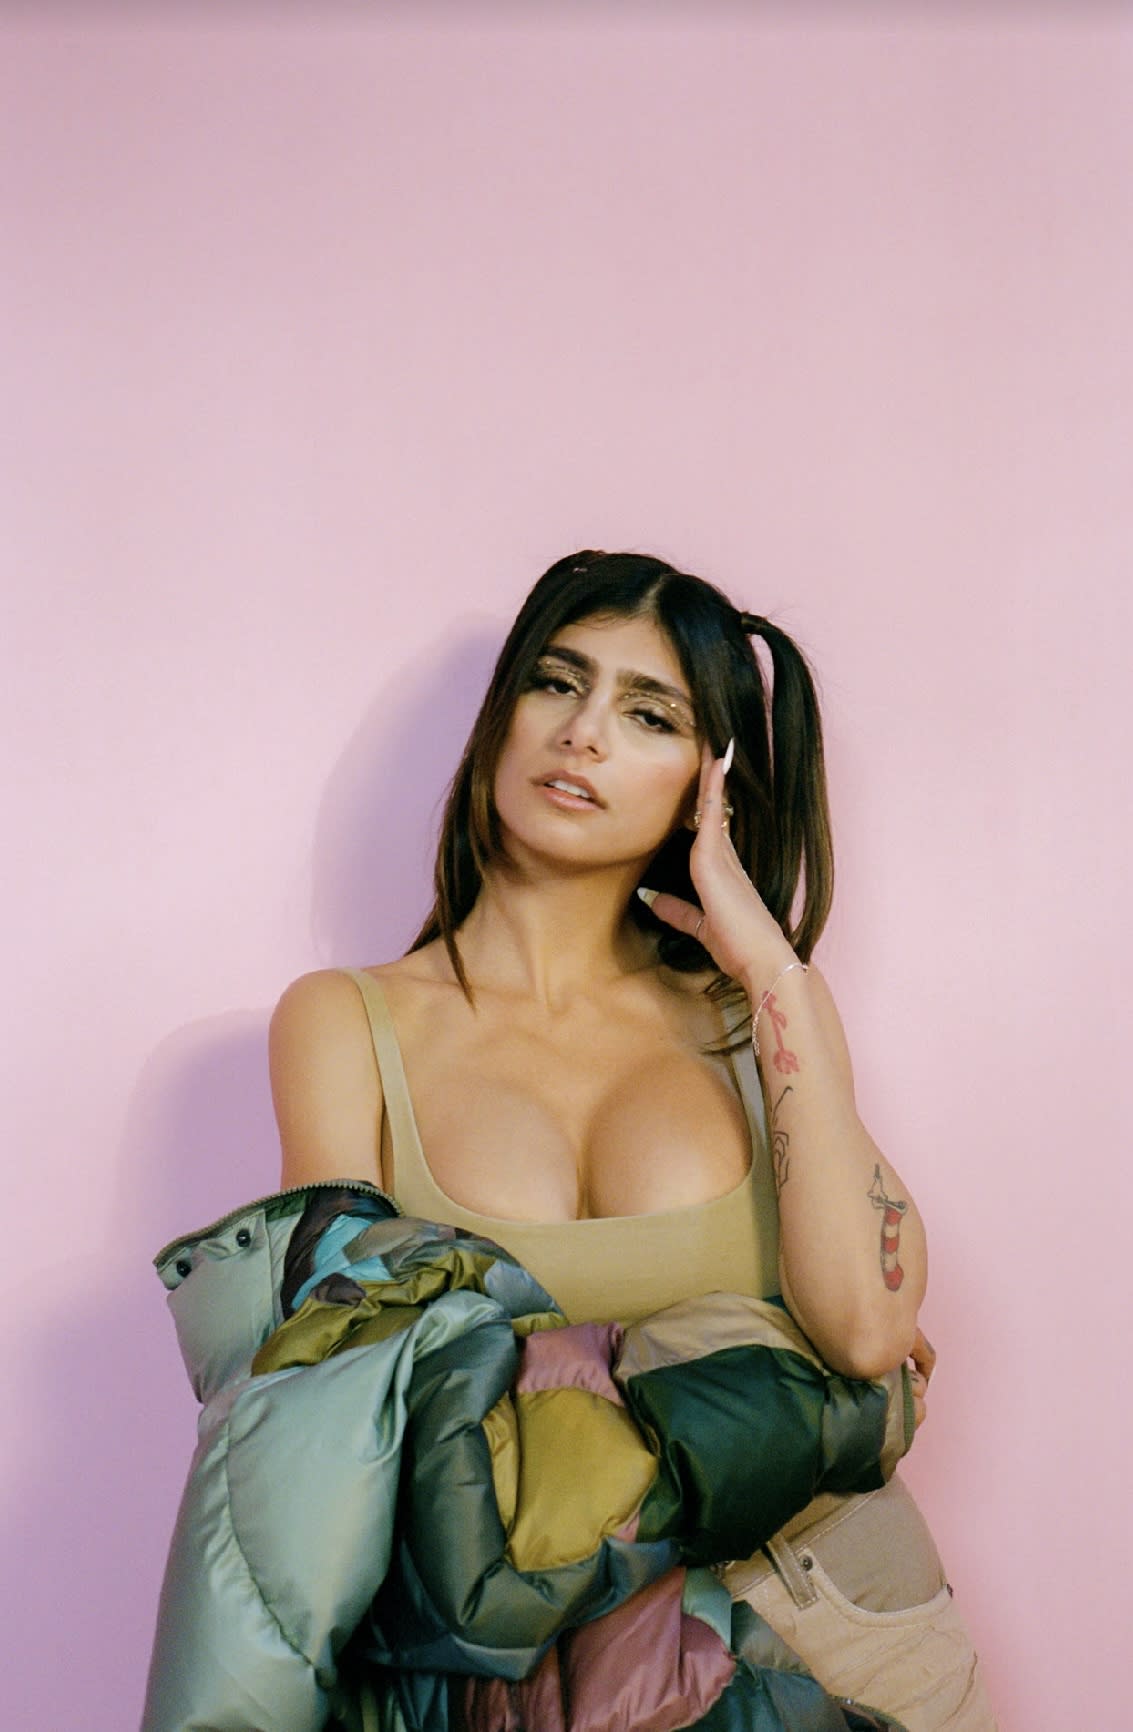 Mia Khalifa and Slawn Star in New Collab Campaign From Outlander Magazine and PLACES+FACES Complex image